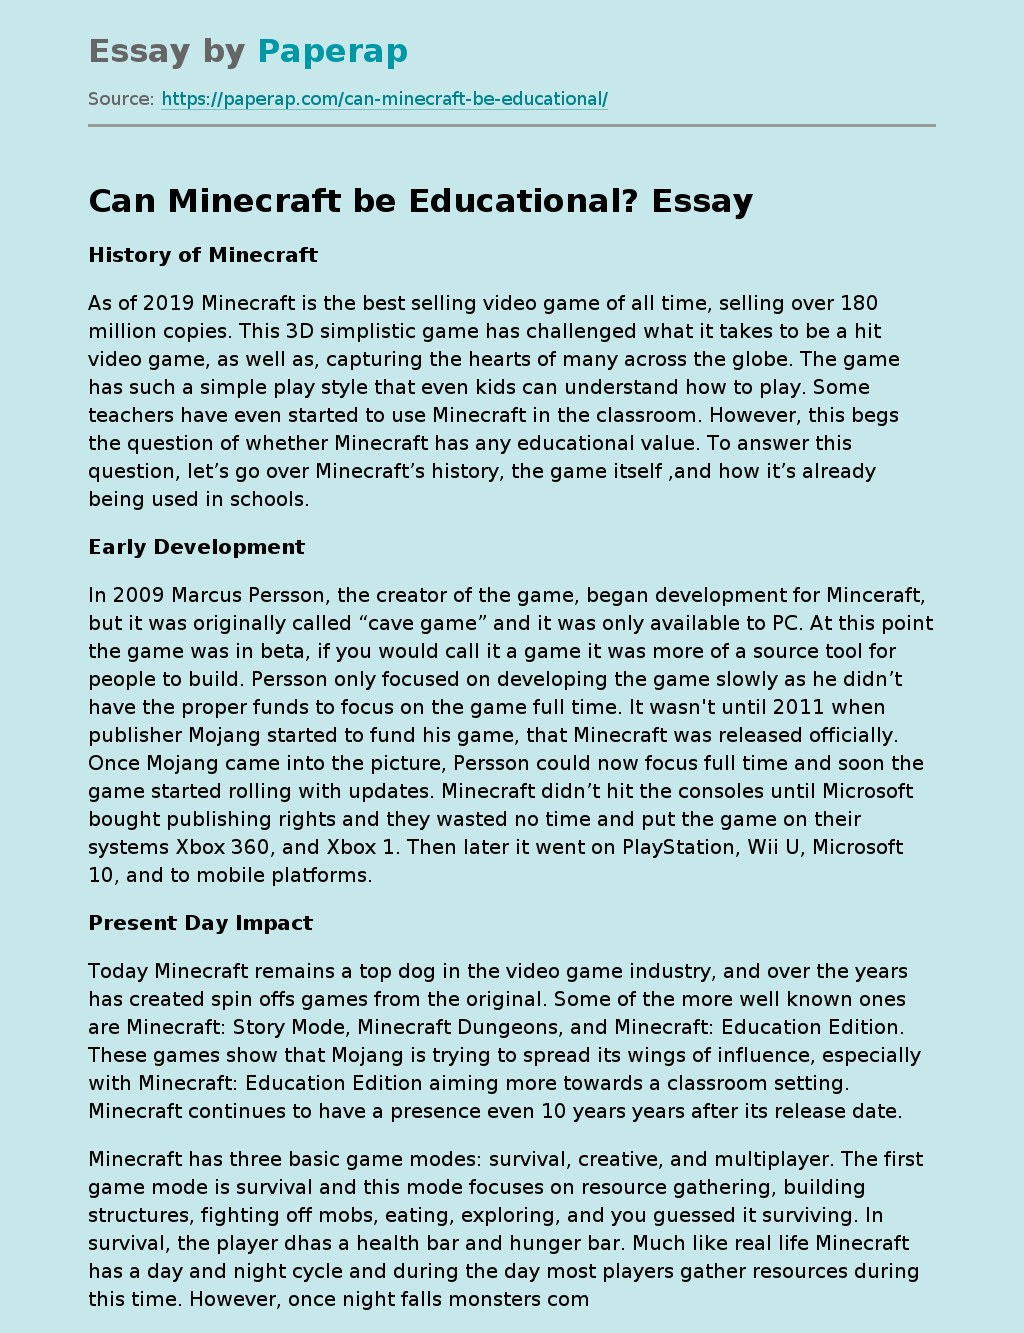 Can Minecraft be Educational?